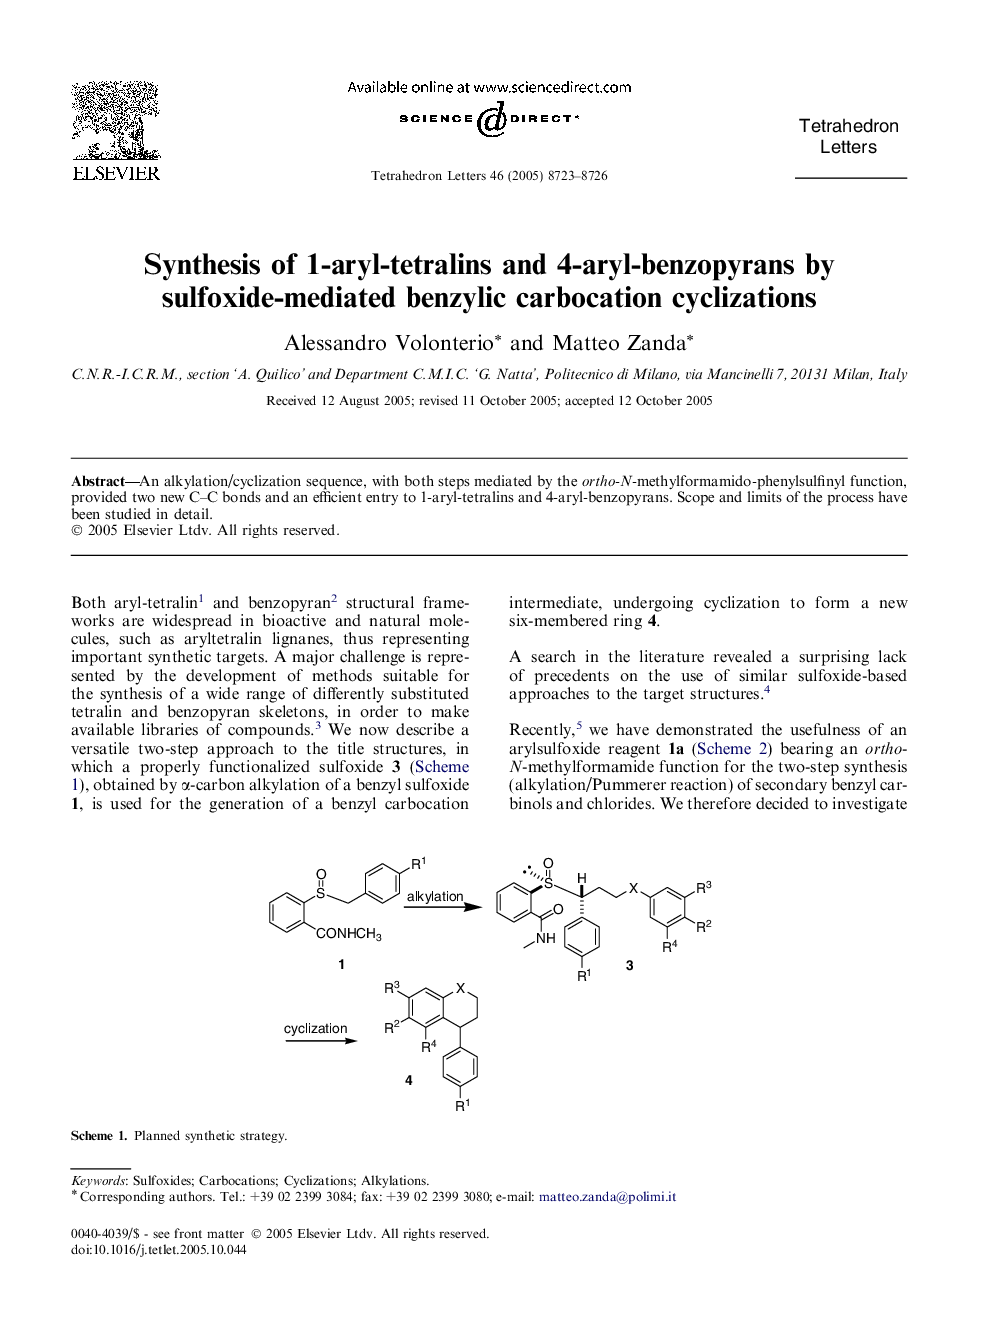 Synthesis of 1-aryl-tetralins and 4-aryl-benzopyrans by sulfoxide-mediated benzylic carbocation cyclizations